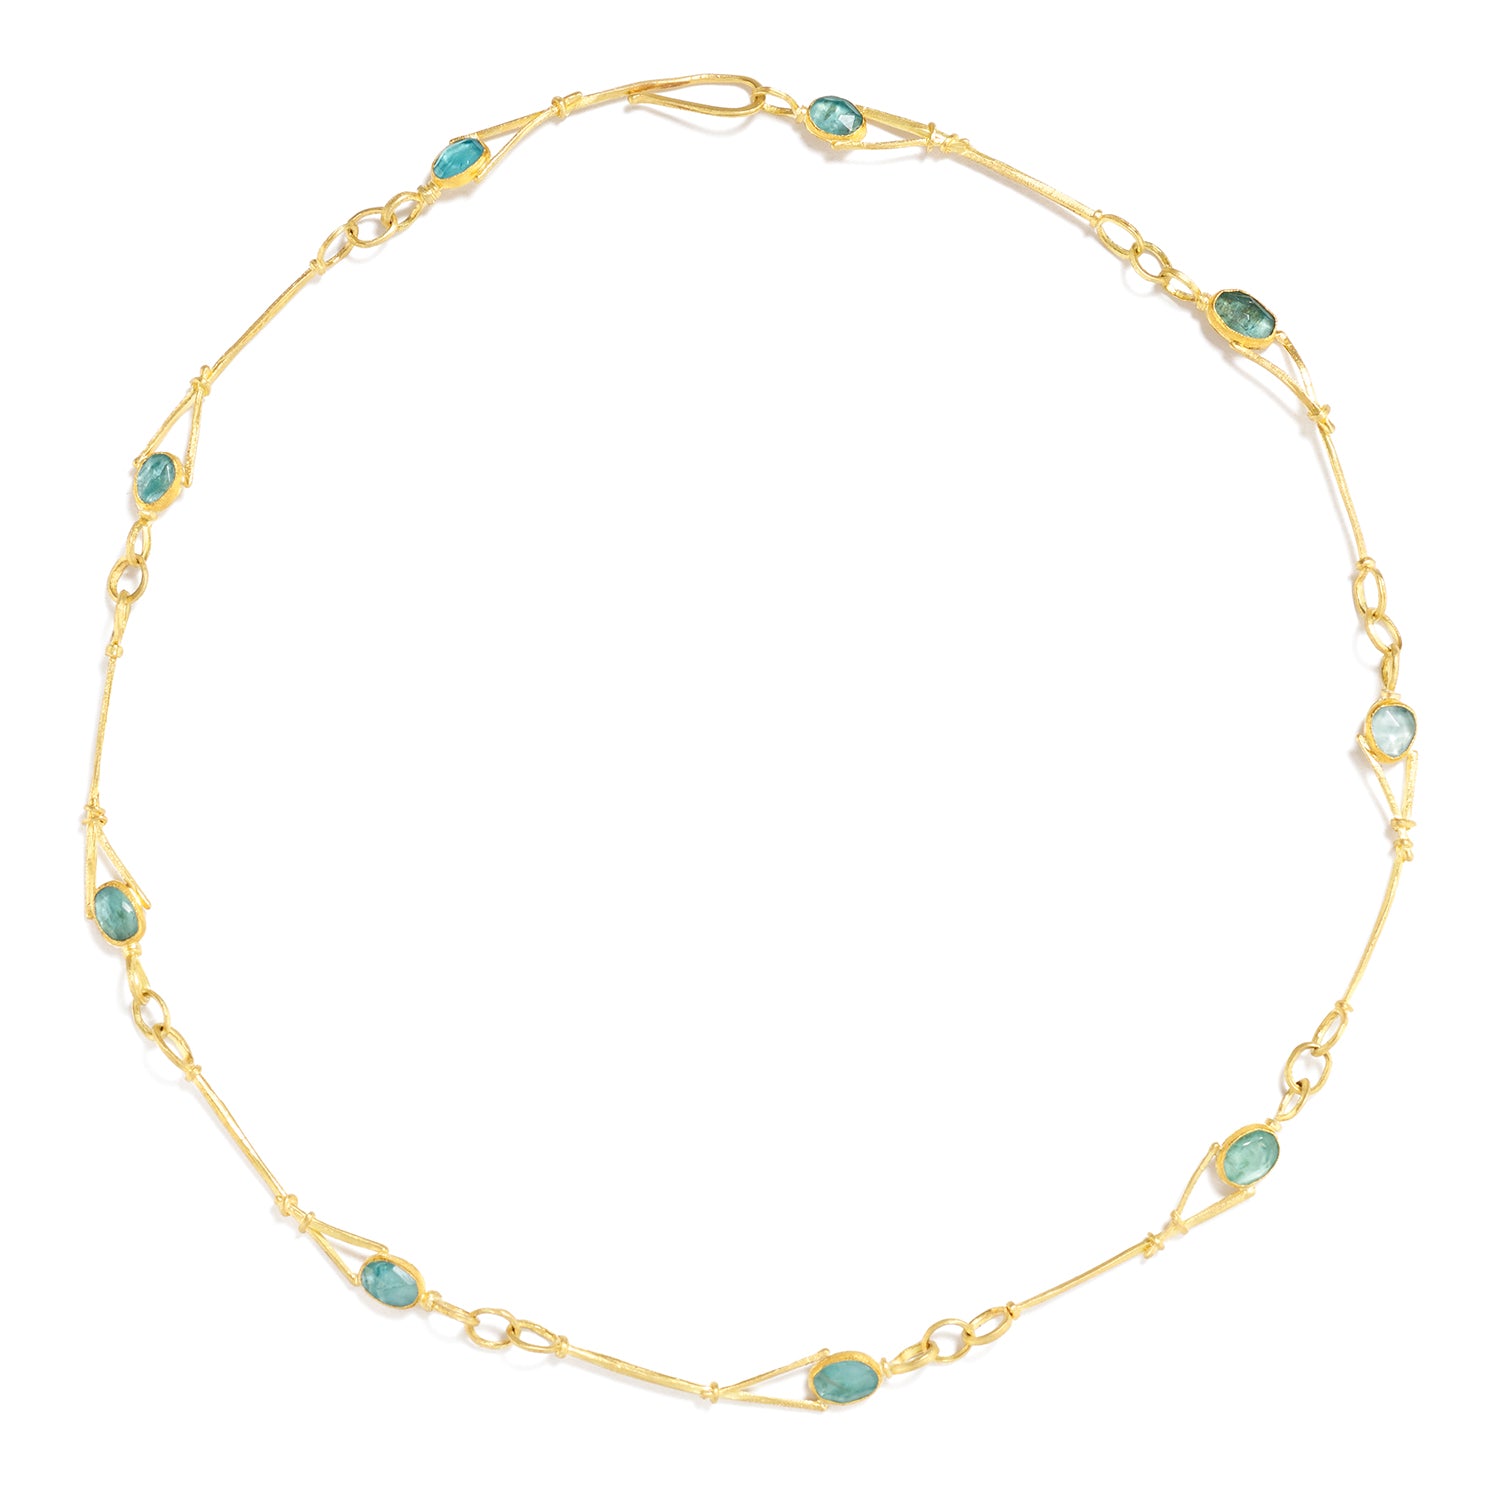 Apatite and Gold Necklace